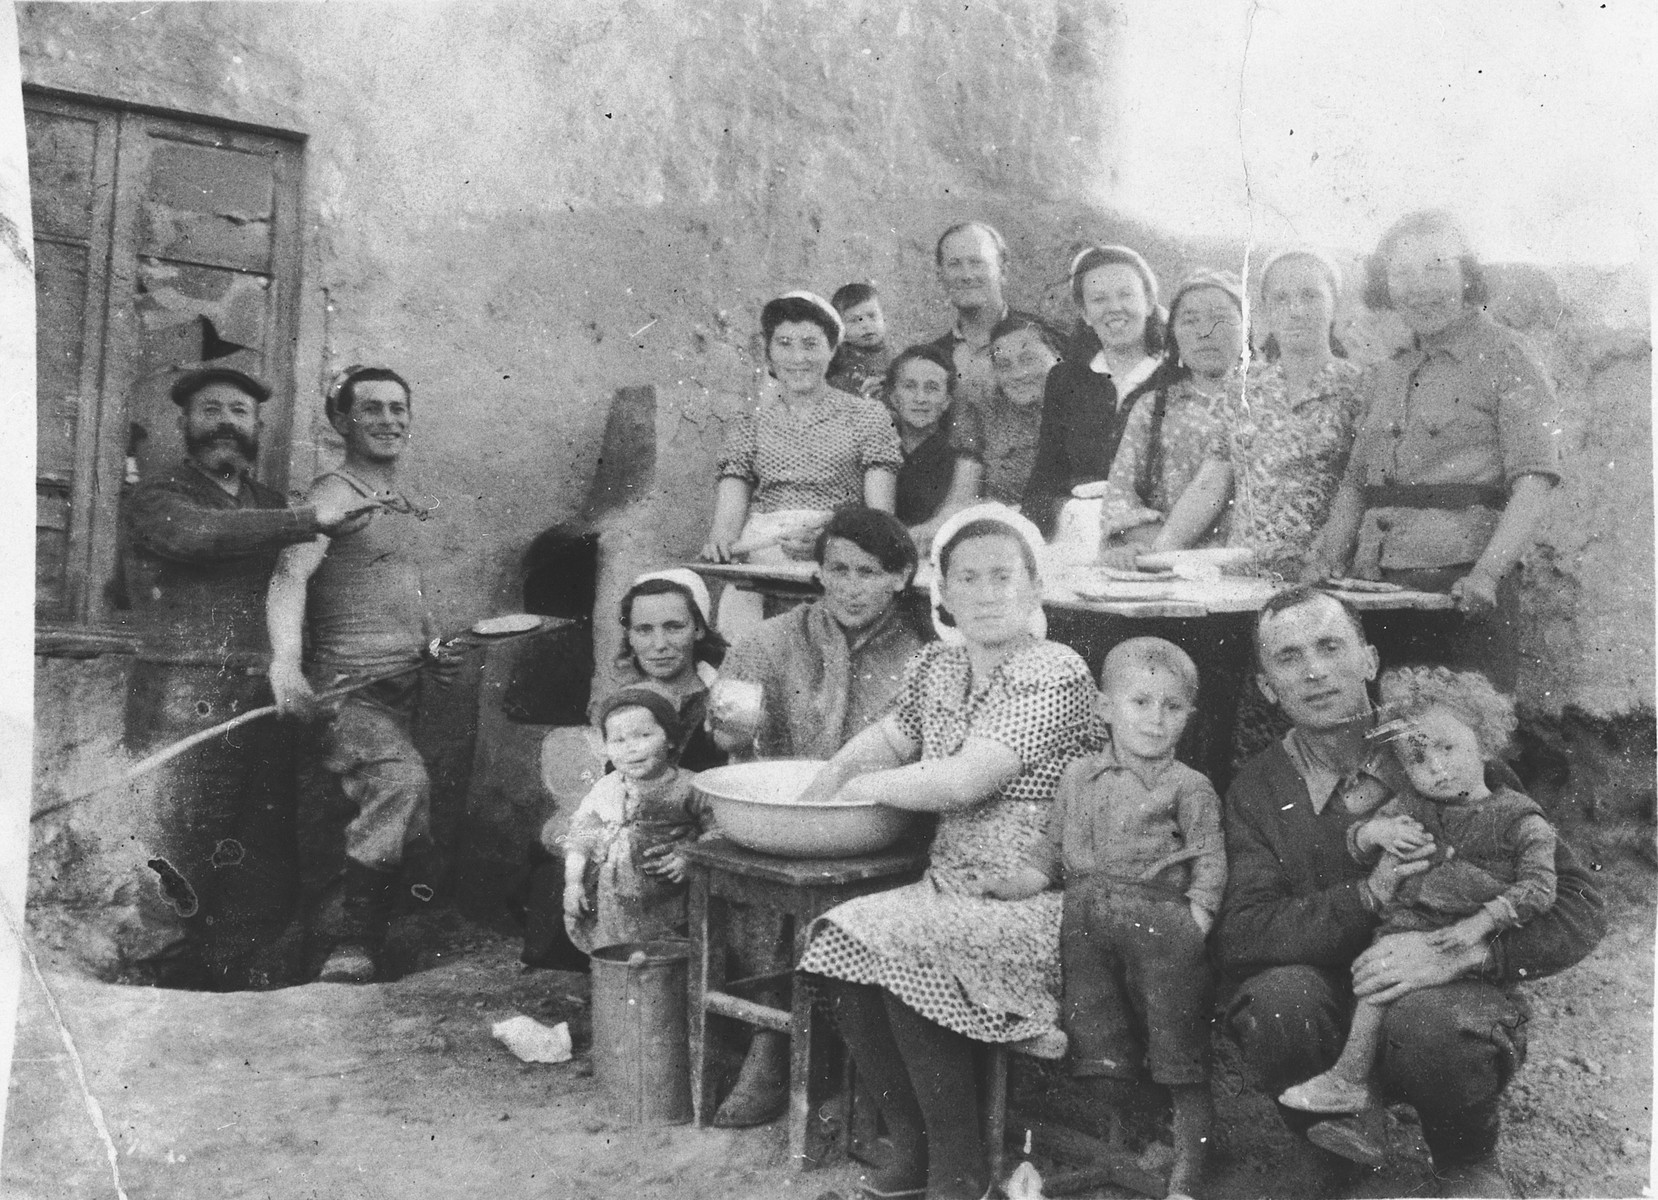 Polish Jews refugees who spent World War II in the Soviet interior, bake matzah for the Passover holiday.

Among those pictured are Joseph Bankir (top row, next to the boy), Israel Bankir (top row, the little boy), Pola Bankir (second row from the top, left), Mojzesz Szczukowski (second from the left, holding the shovel), Hela (Krakower) Szczukowski (front row, left, holding the child, Malka Szczukowski).